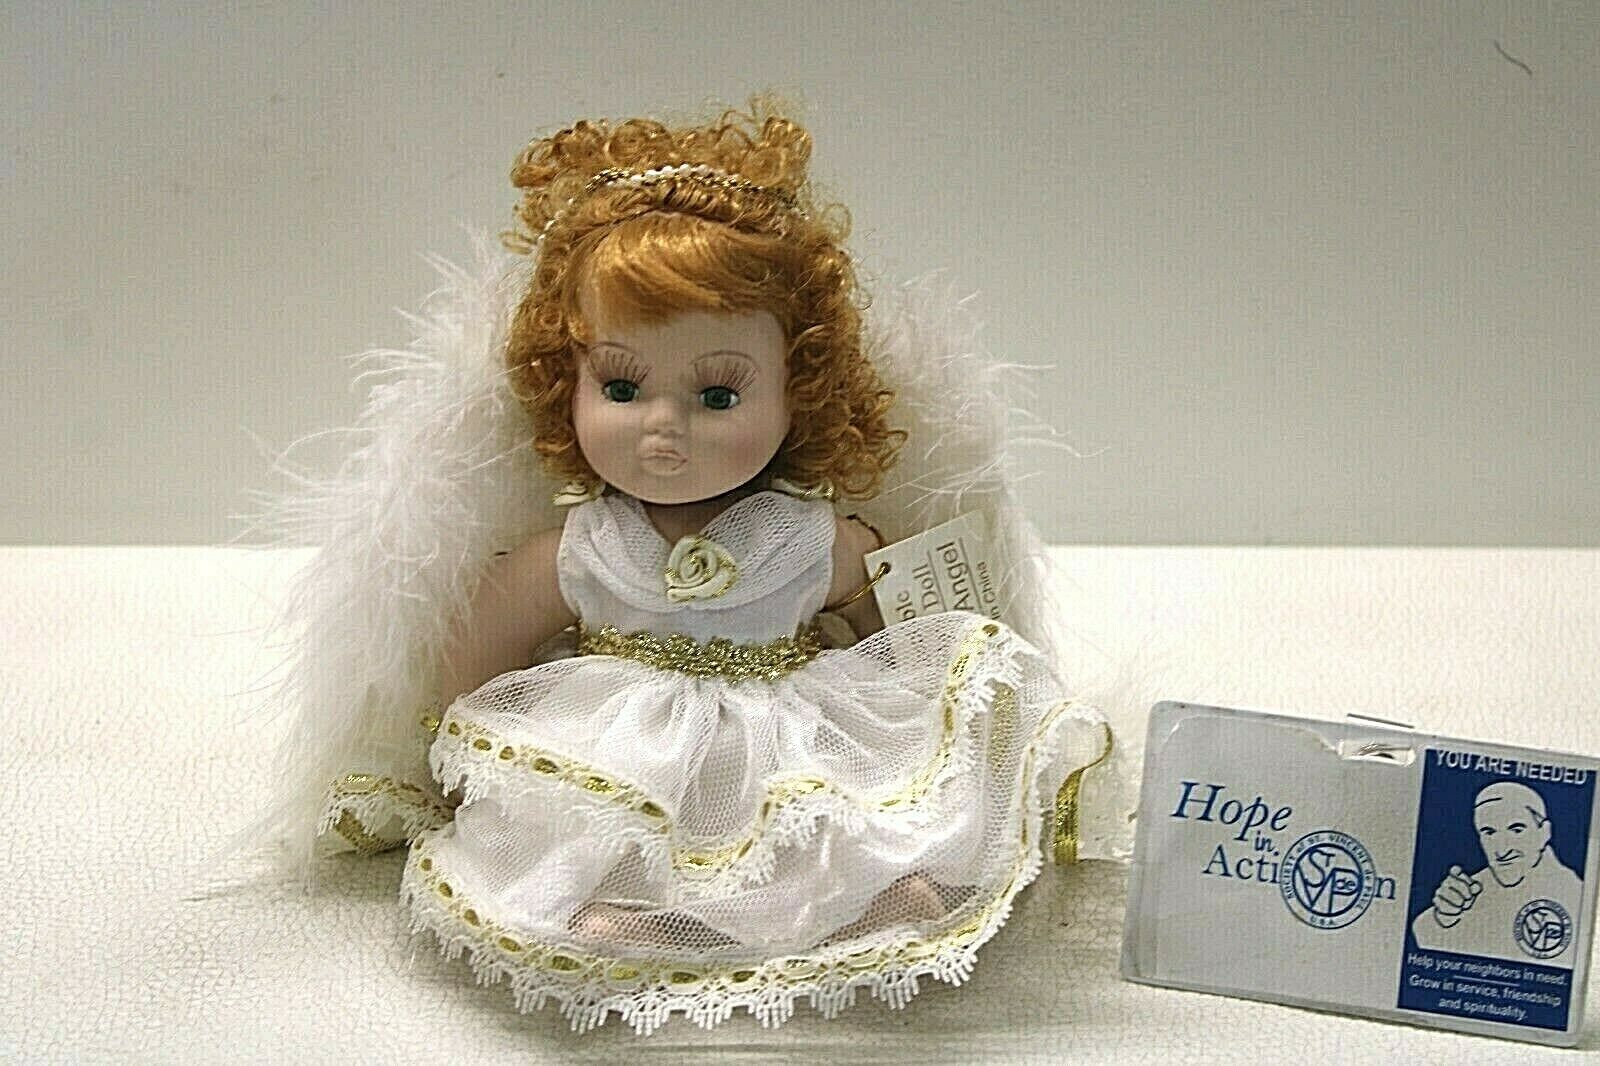 Show Stoppers Porcelain Doll